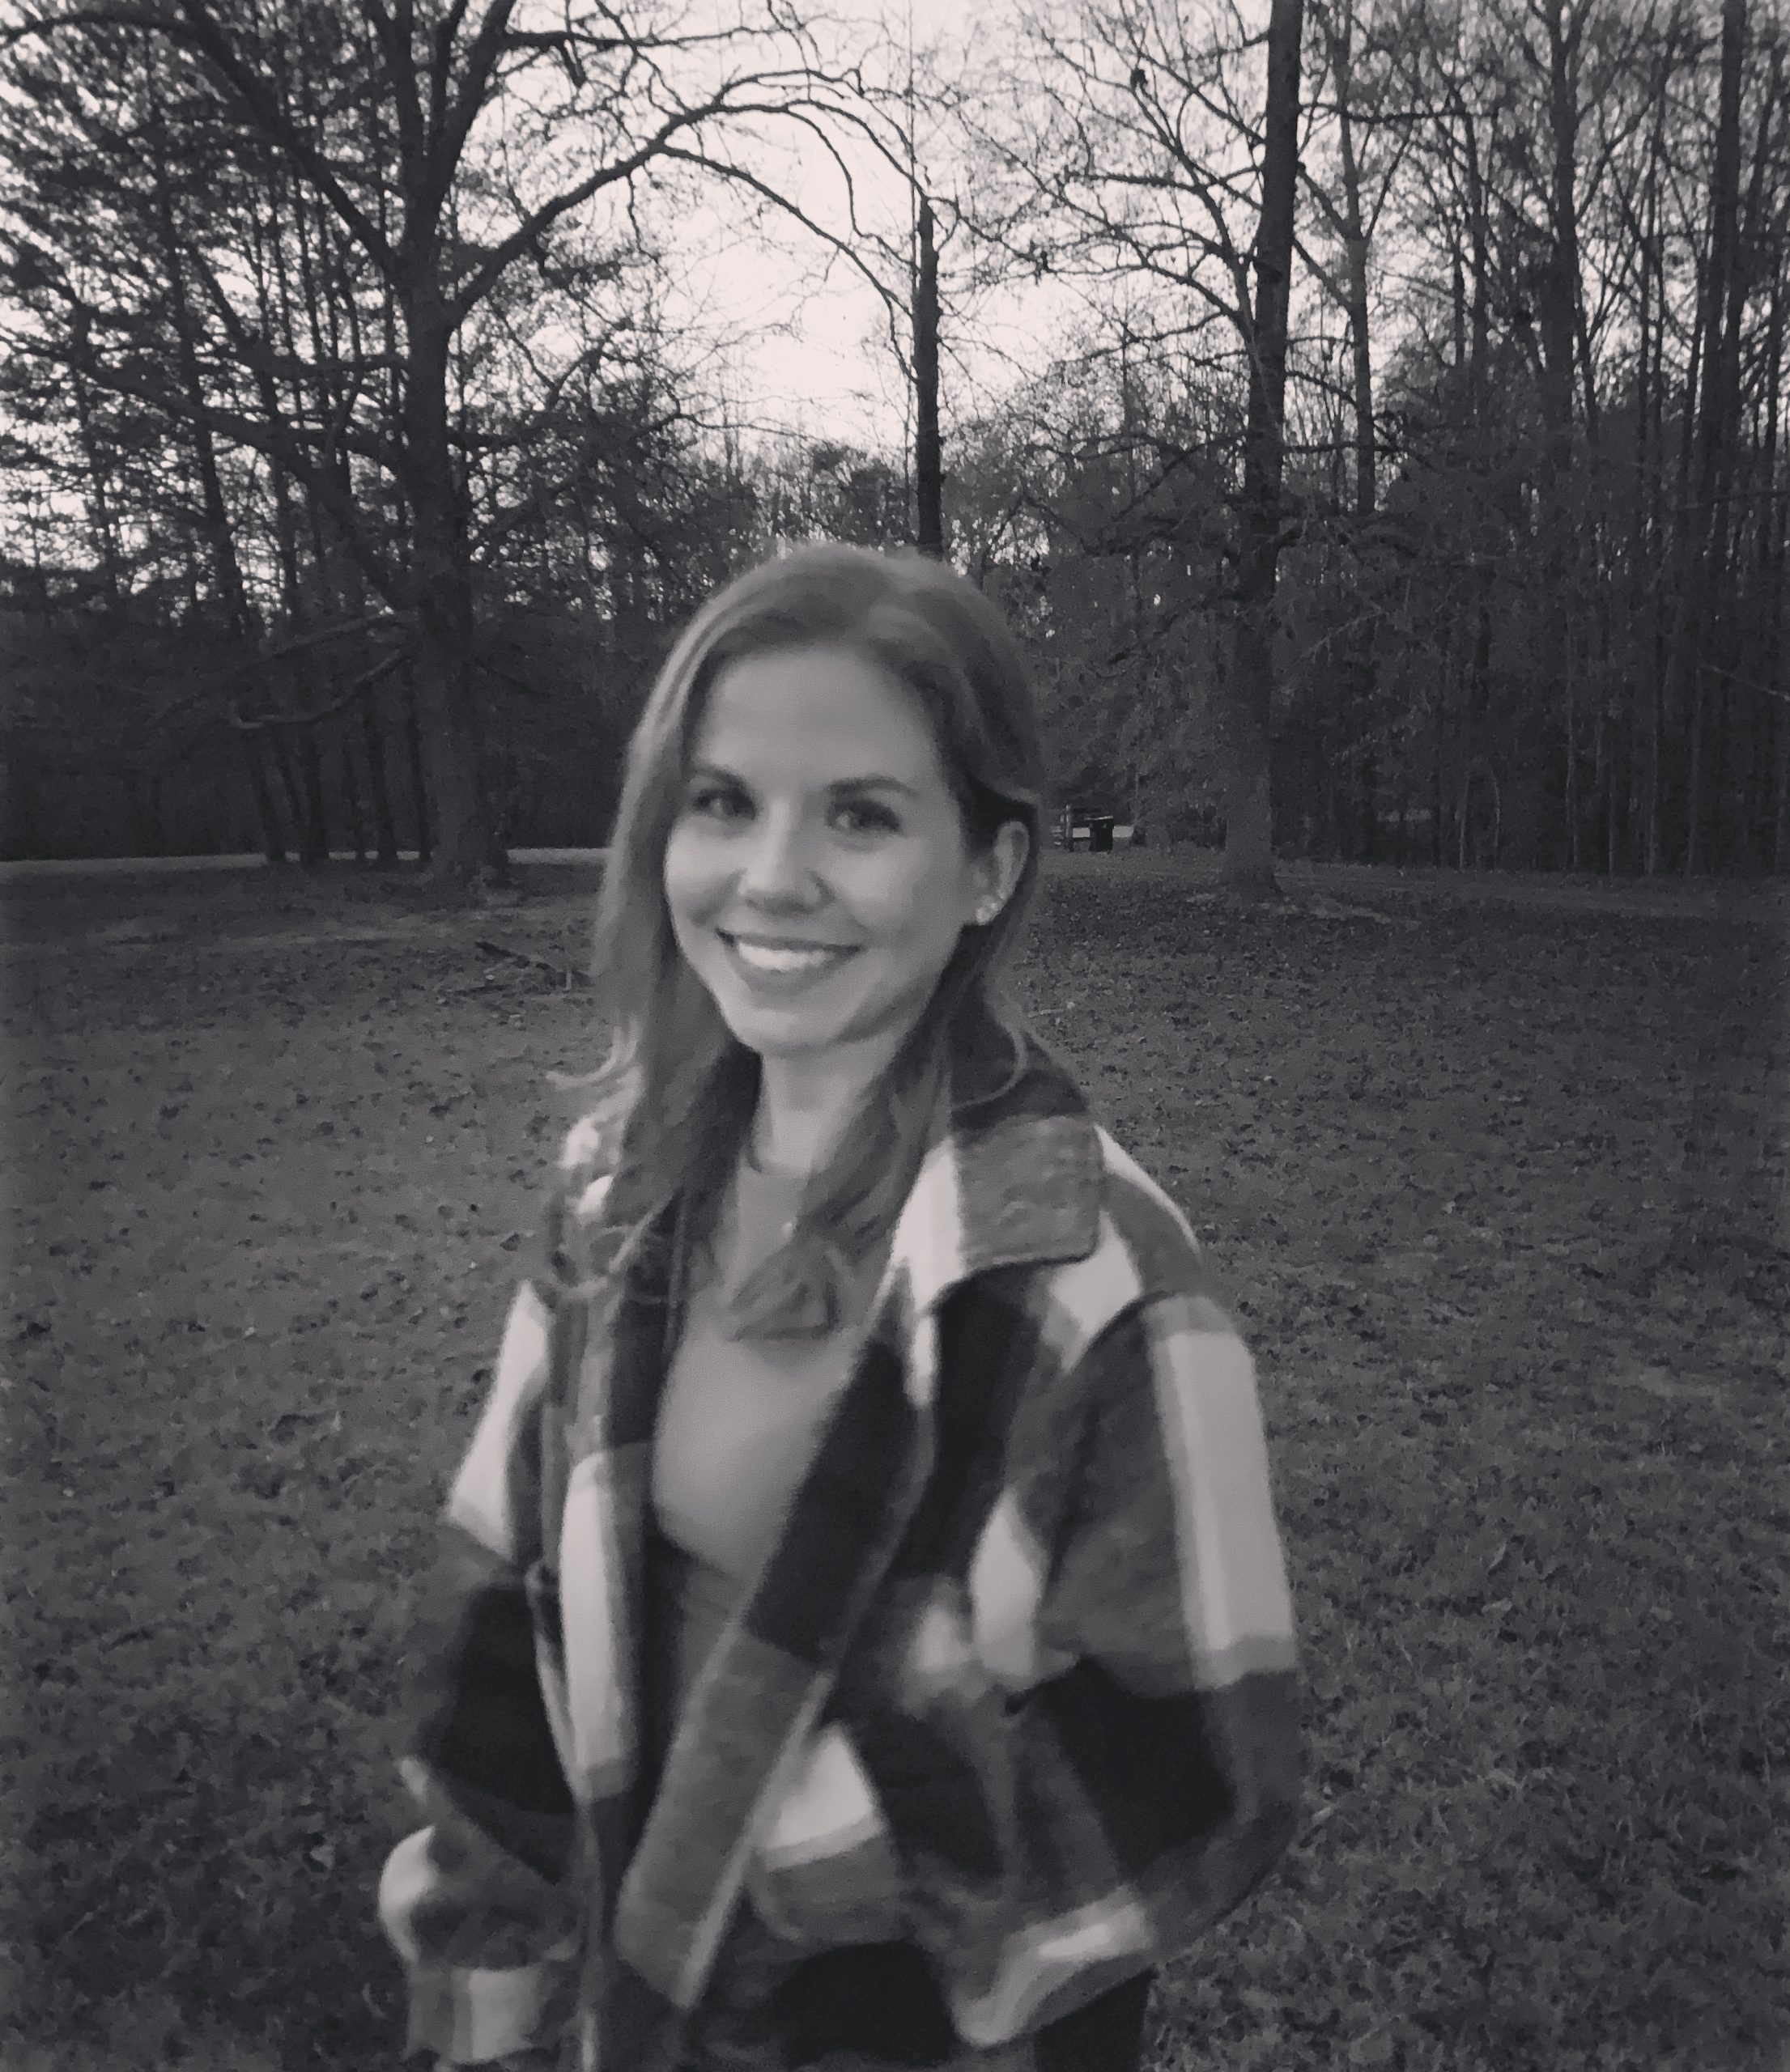 A black and white photo of Claire Beth Karnap standing in front of a picturesque landscape, with trees and spacious grass. She is wearing a plaid coat and smiles at the camera..